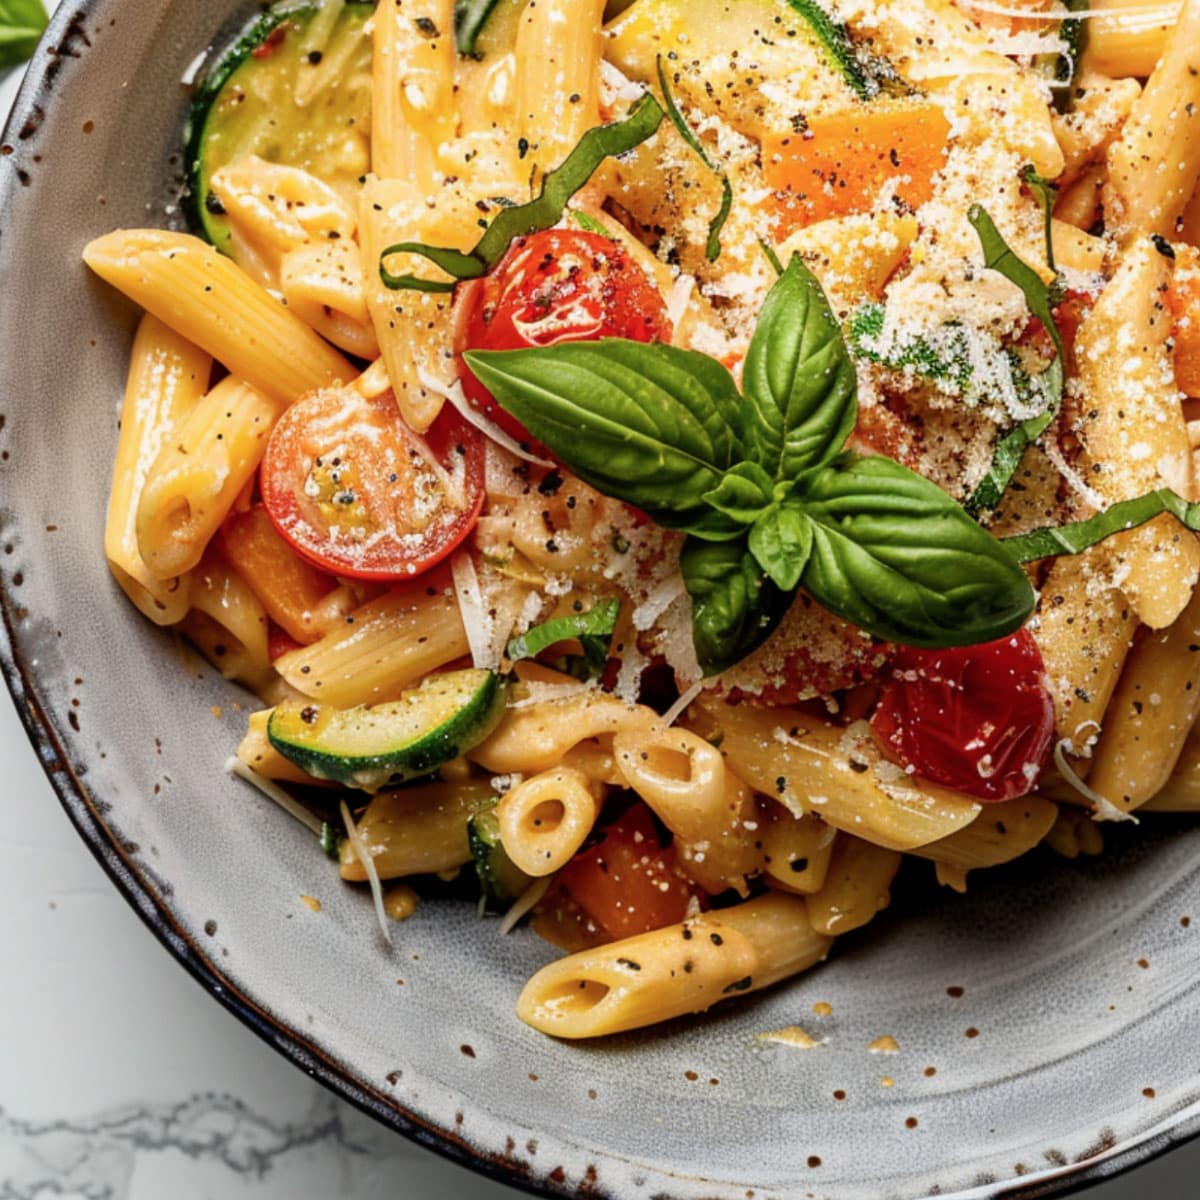 Classic, creamy, or healthy Penne Pasta Primavera recipe with fresh vegetables